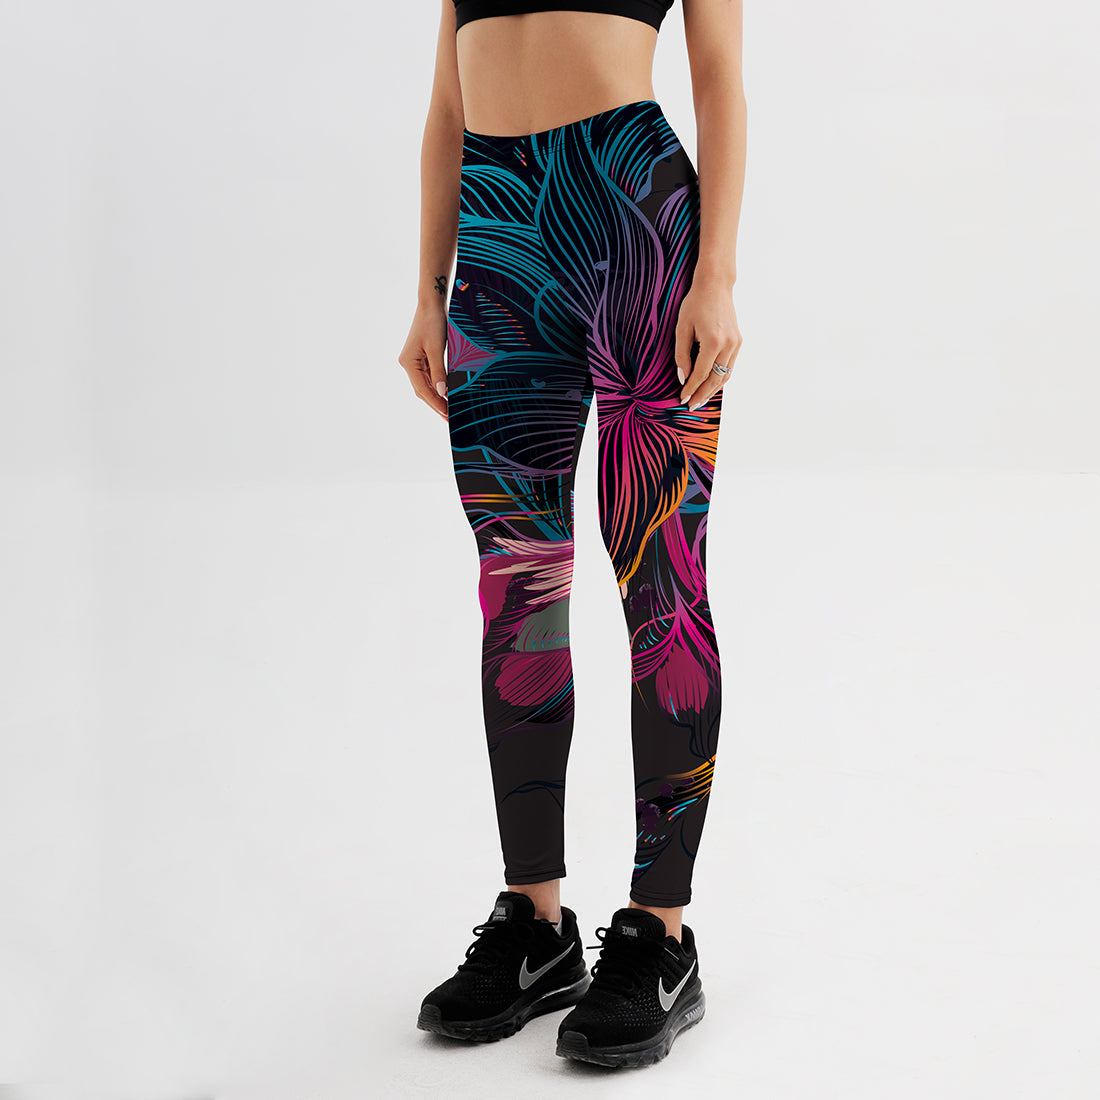 Mens and Womens Gym Activewear Clothing Store